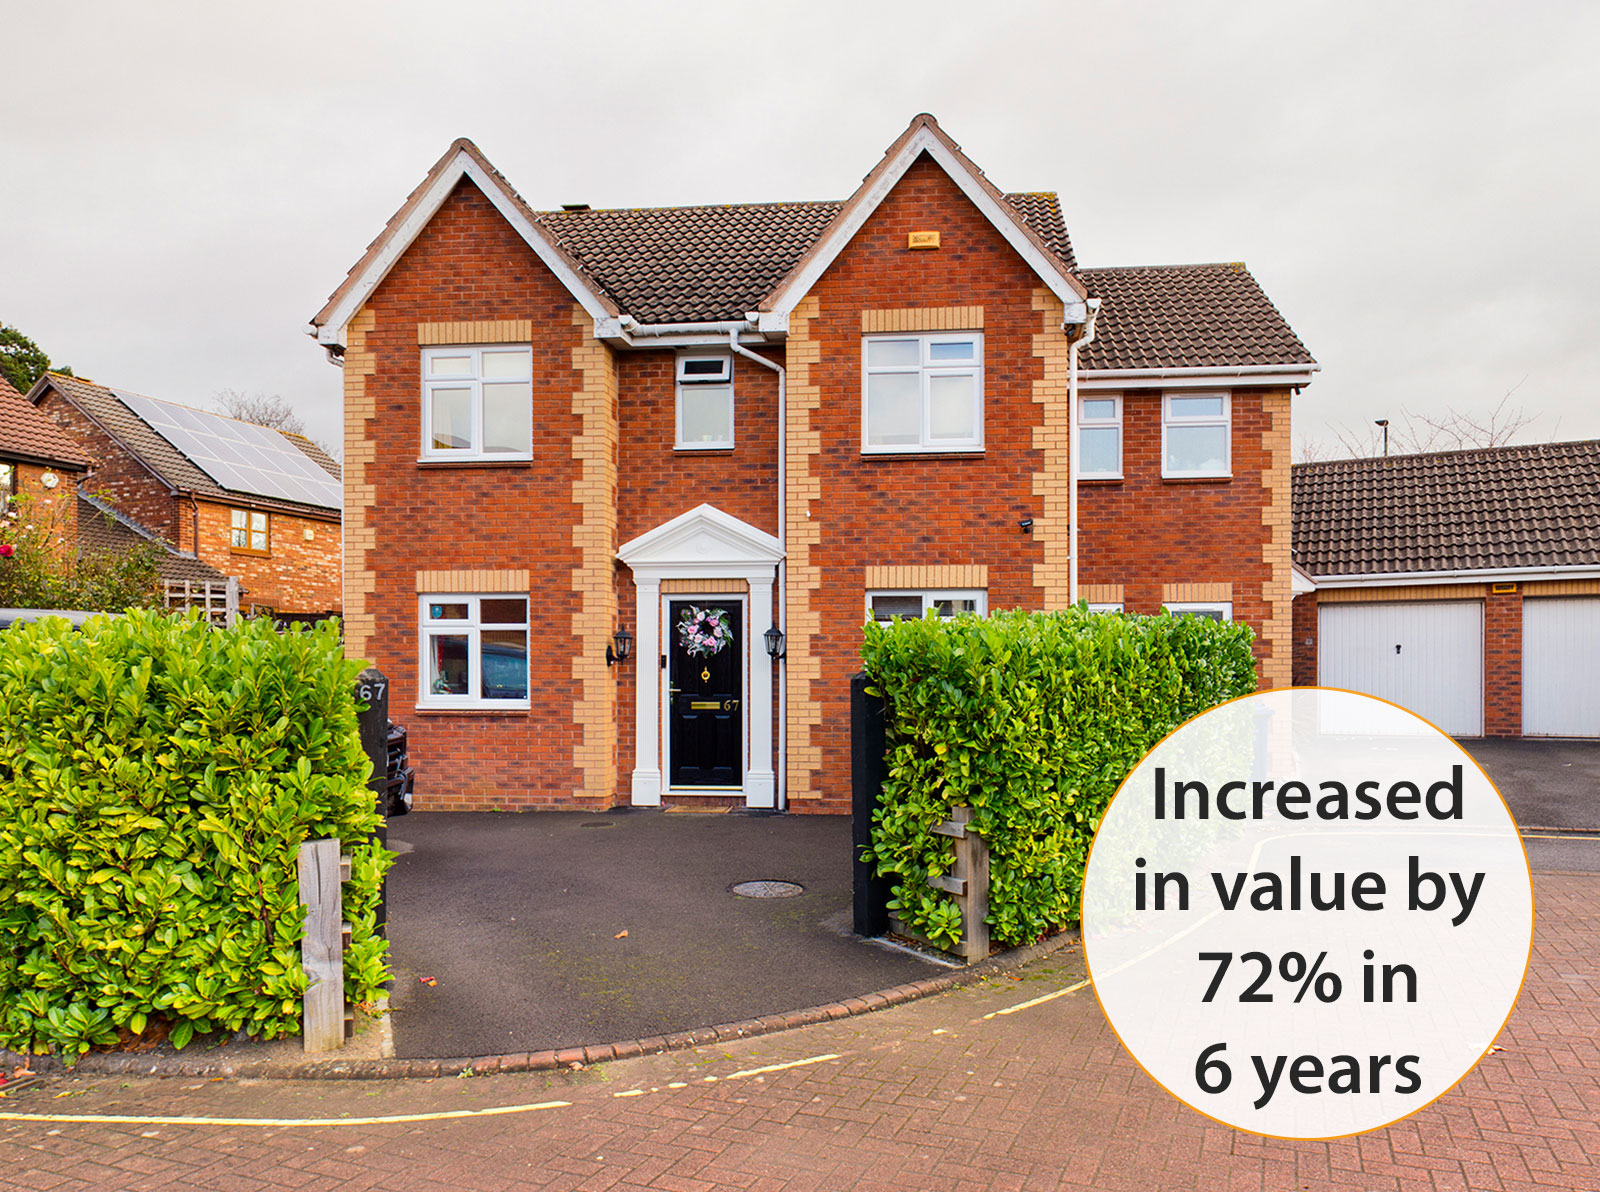 hucclecote property prices